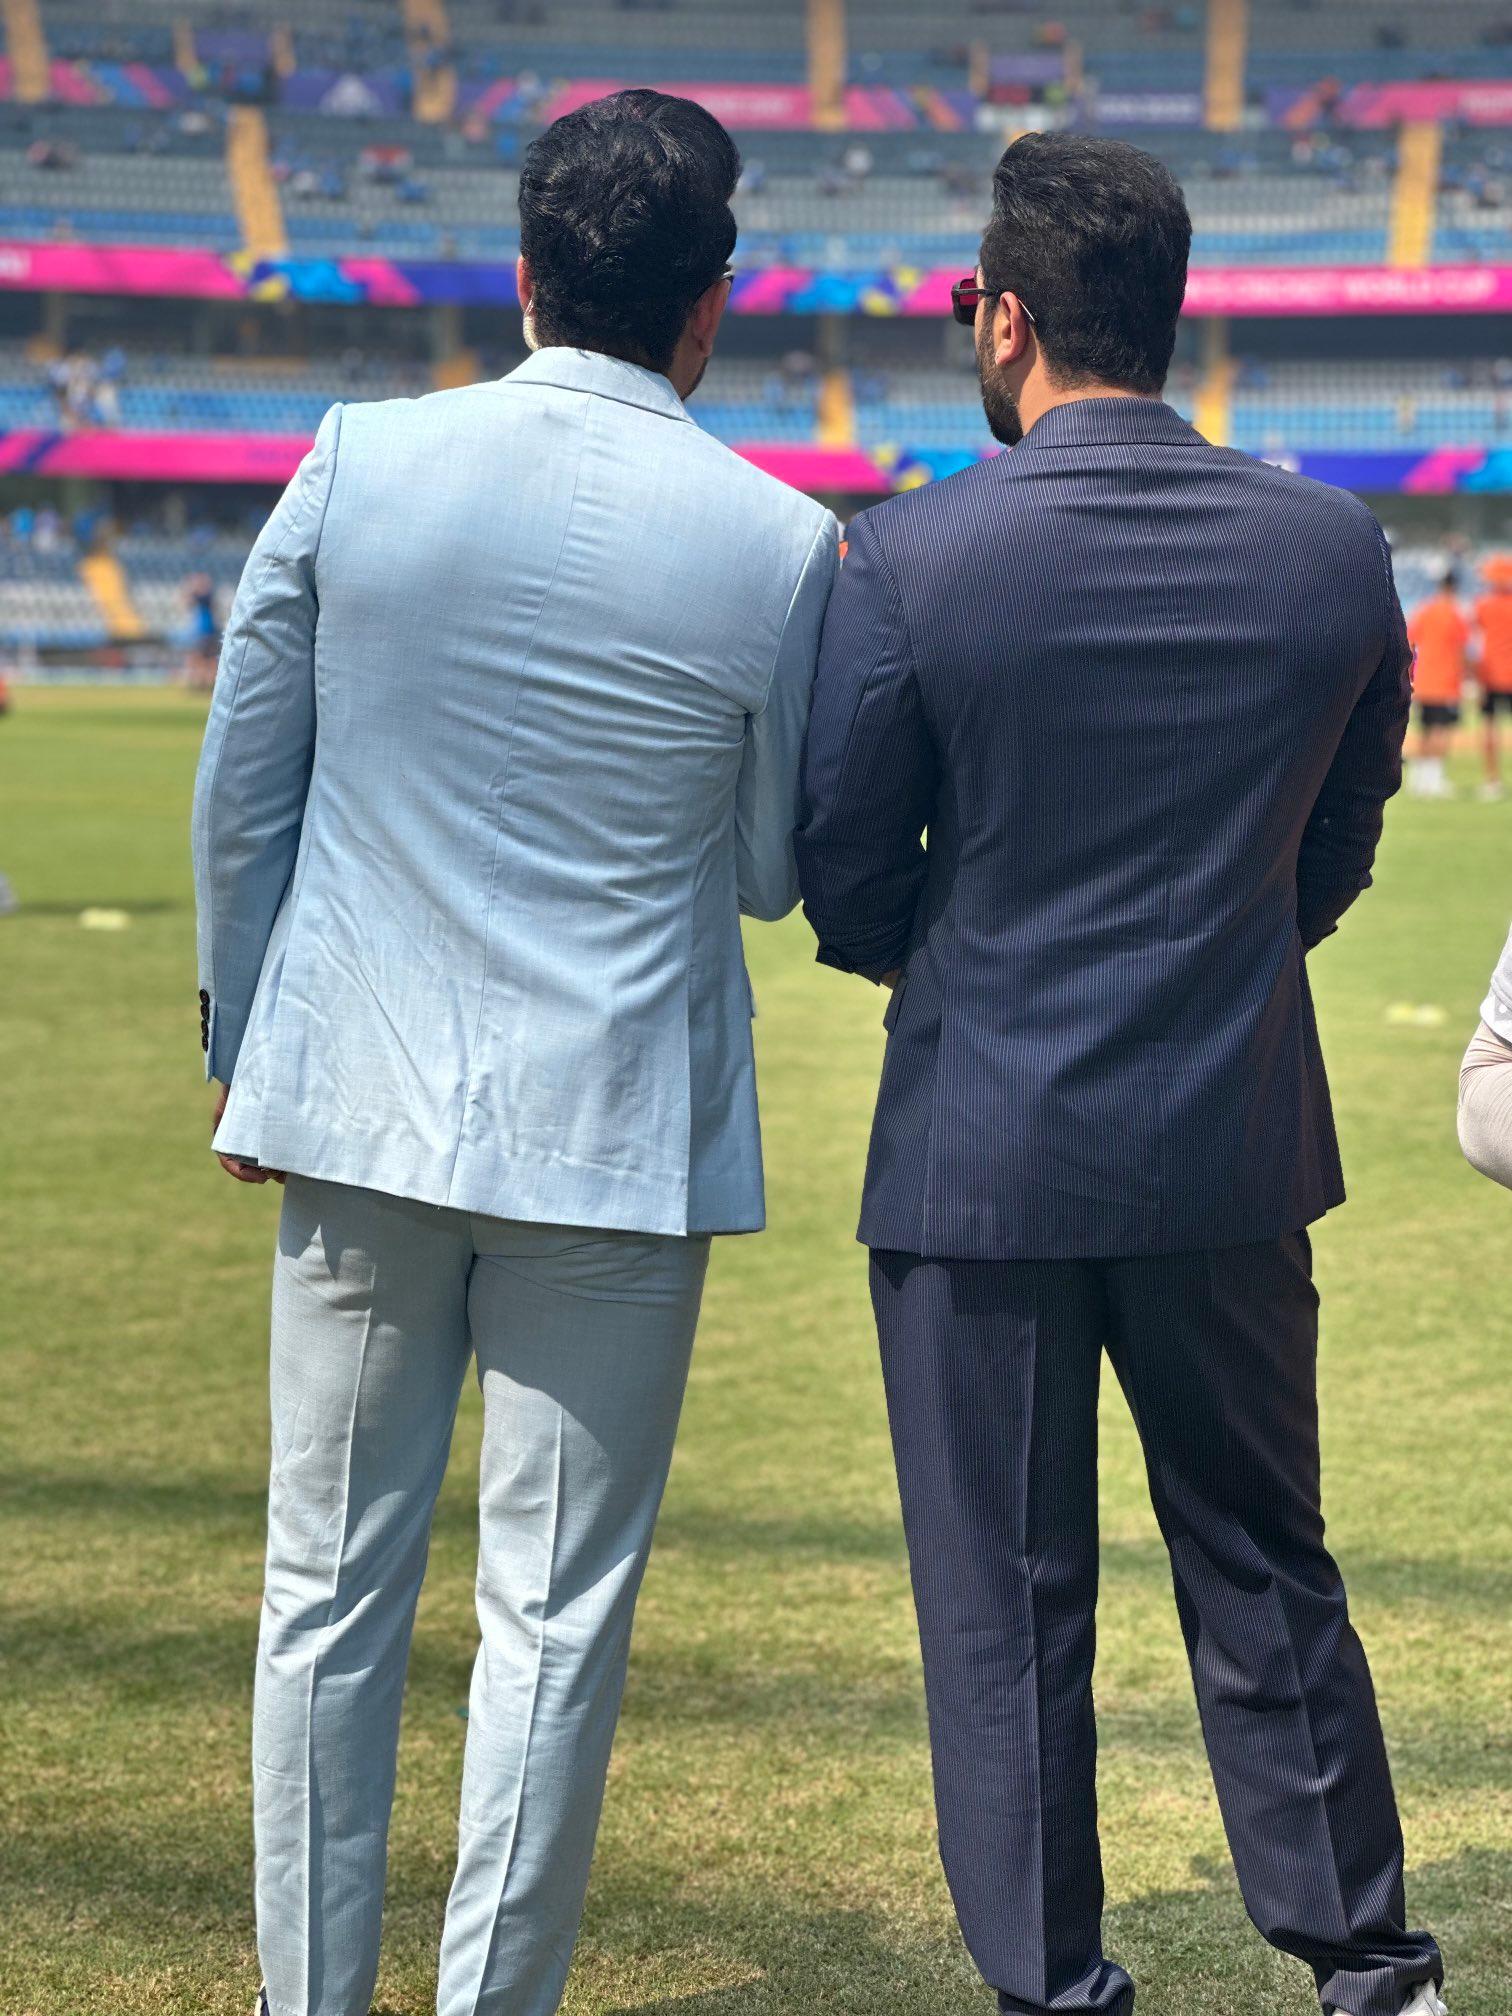 Irfan Pathan started a guessing game on 'X' as to who he was standing next to. Can you take a guess?